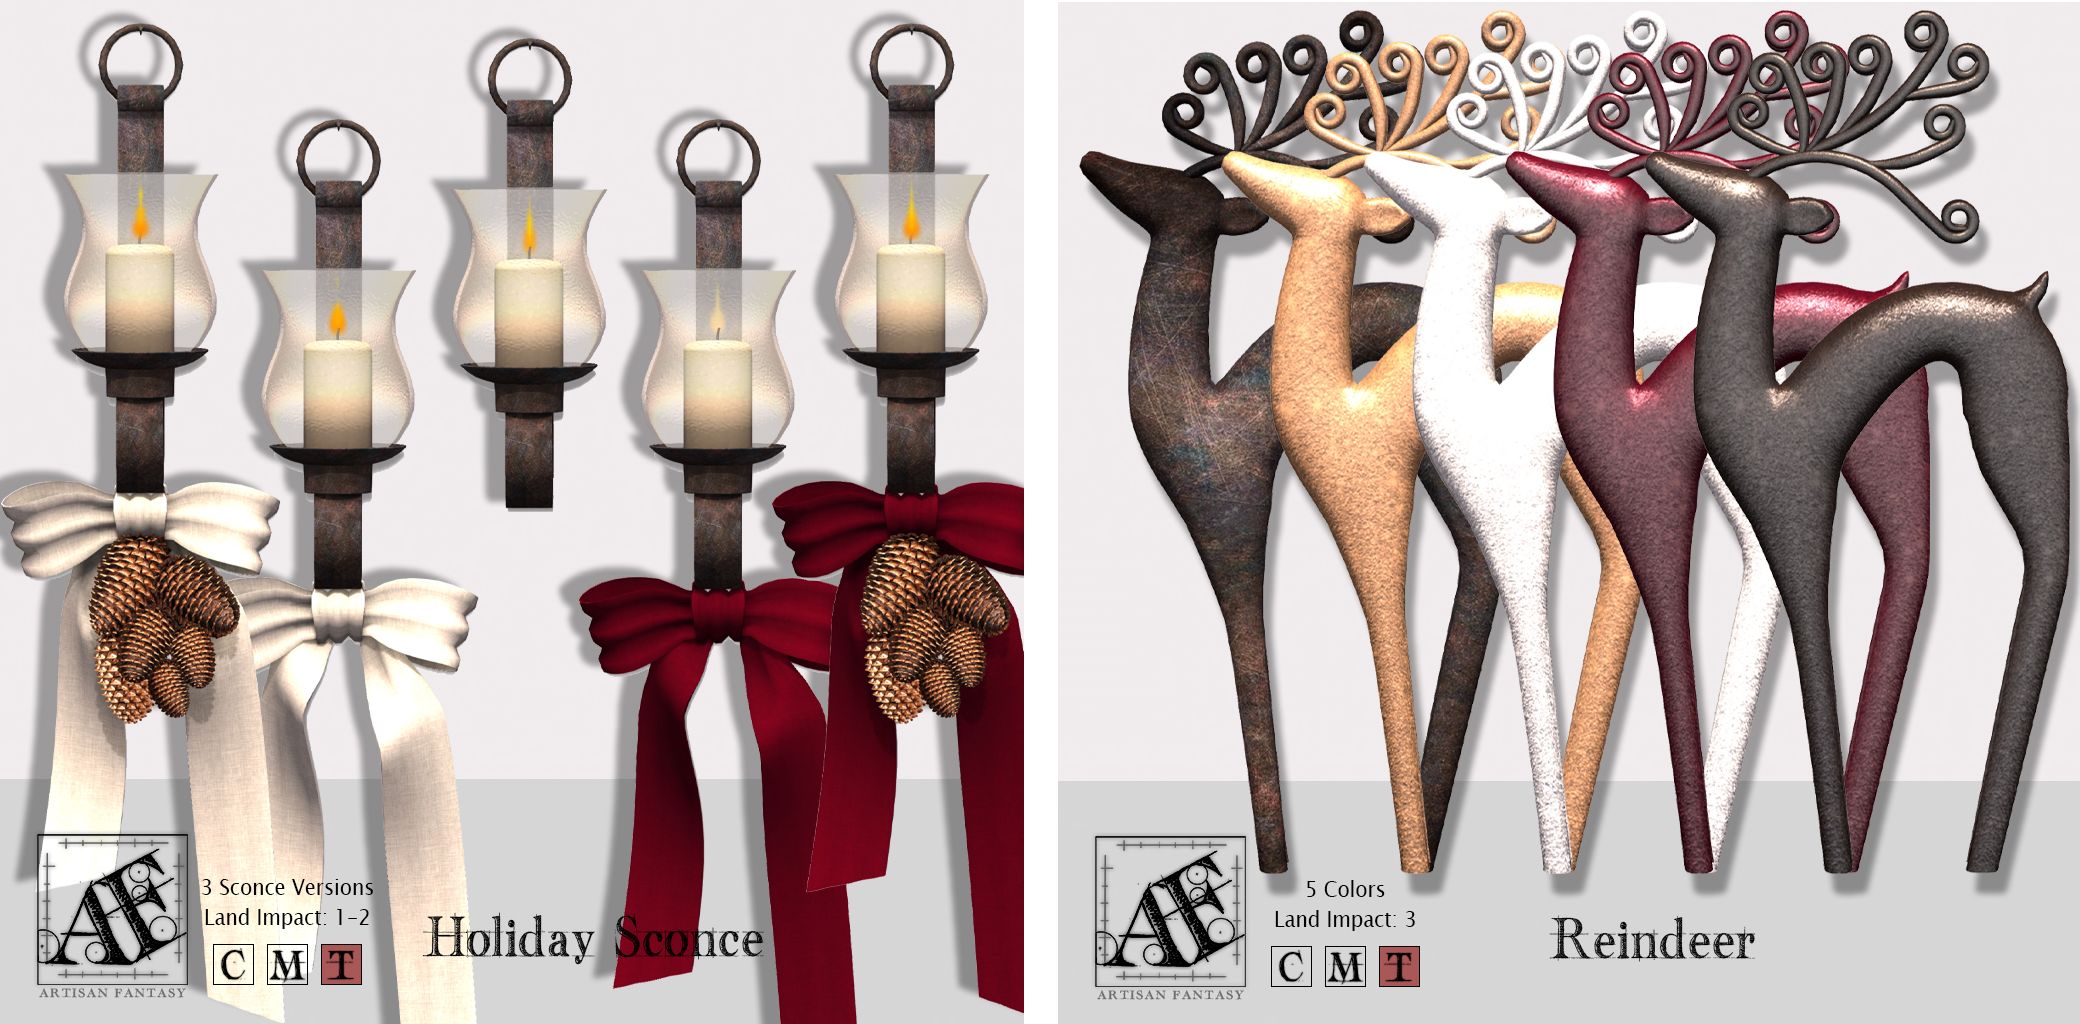 Artisan Fantasy – Holiday Sconce and Reindeer